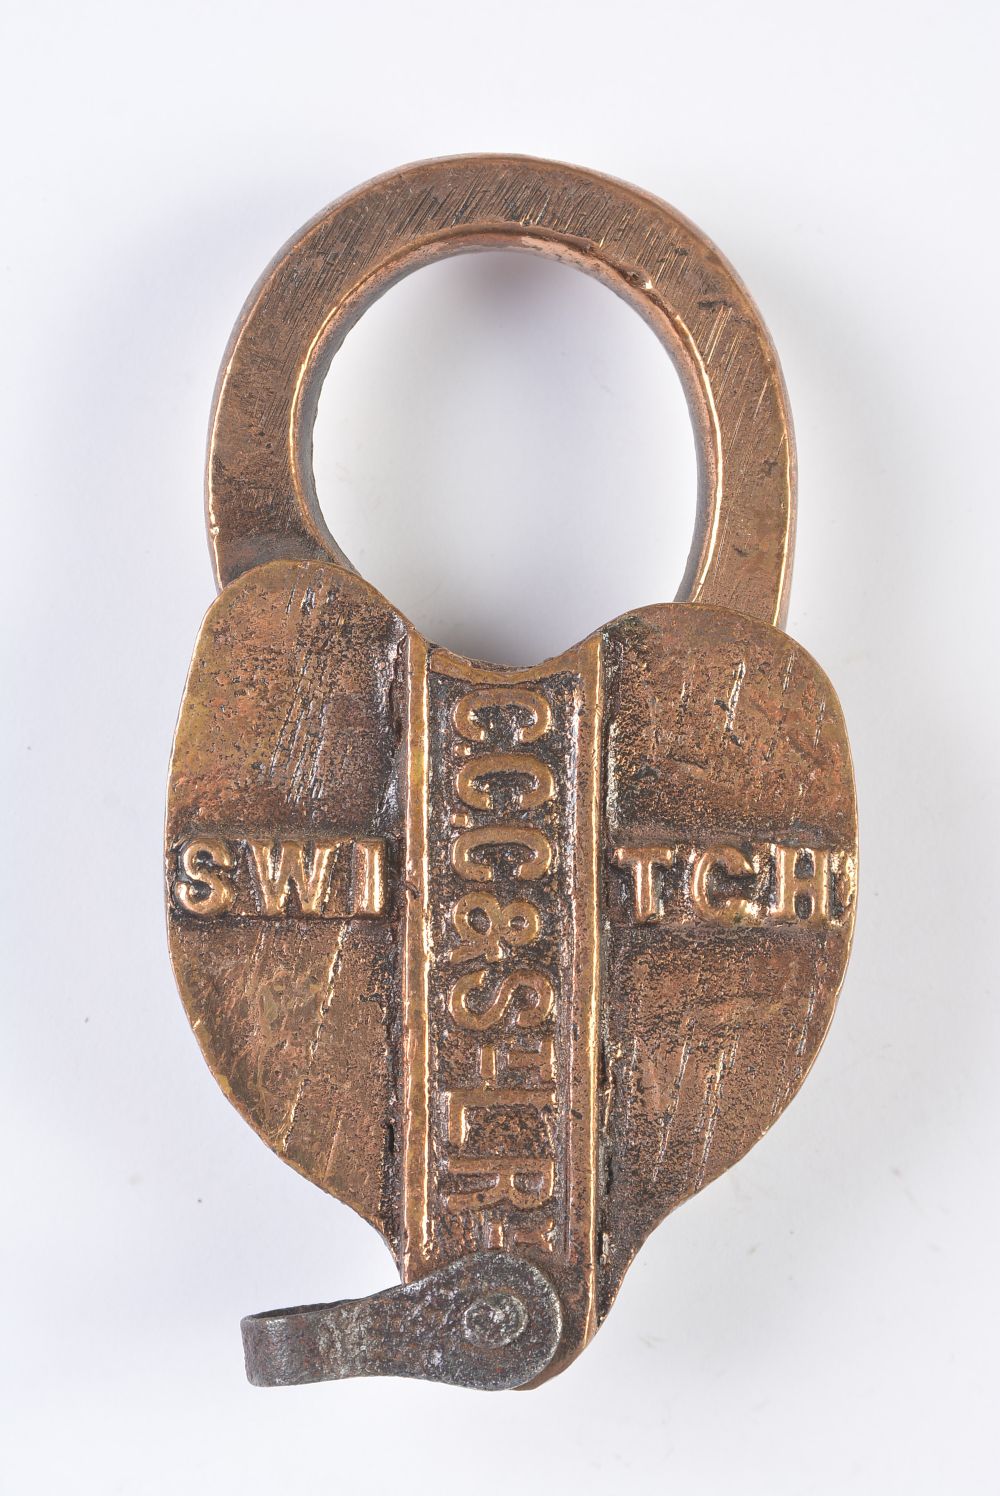 A C.C.C.&St.L RAILWAY BRASS PADLOCK WITH HIGH SHACKLE